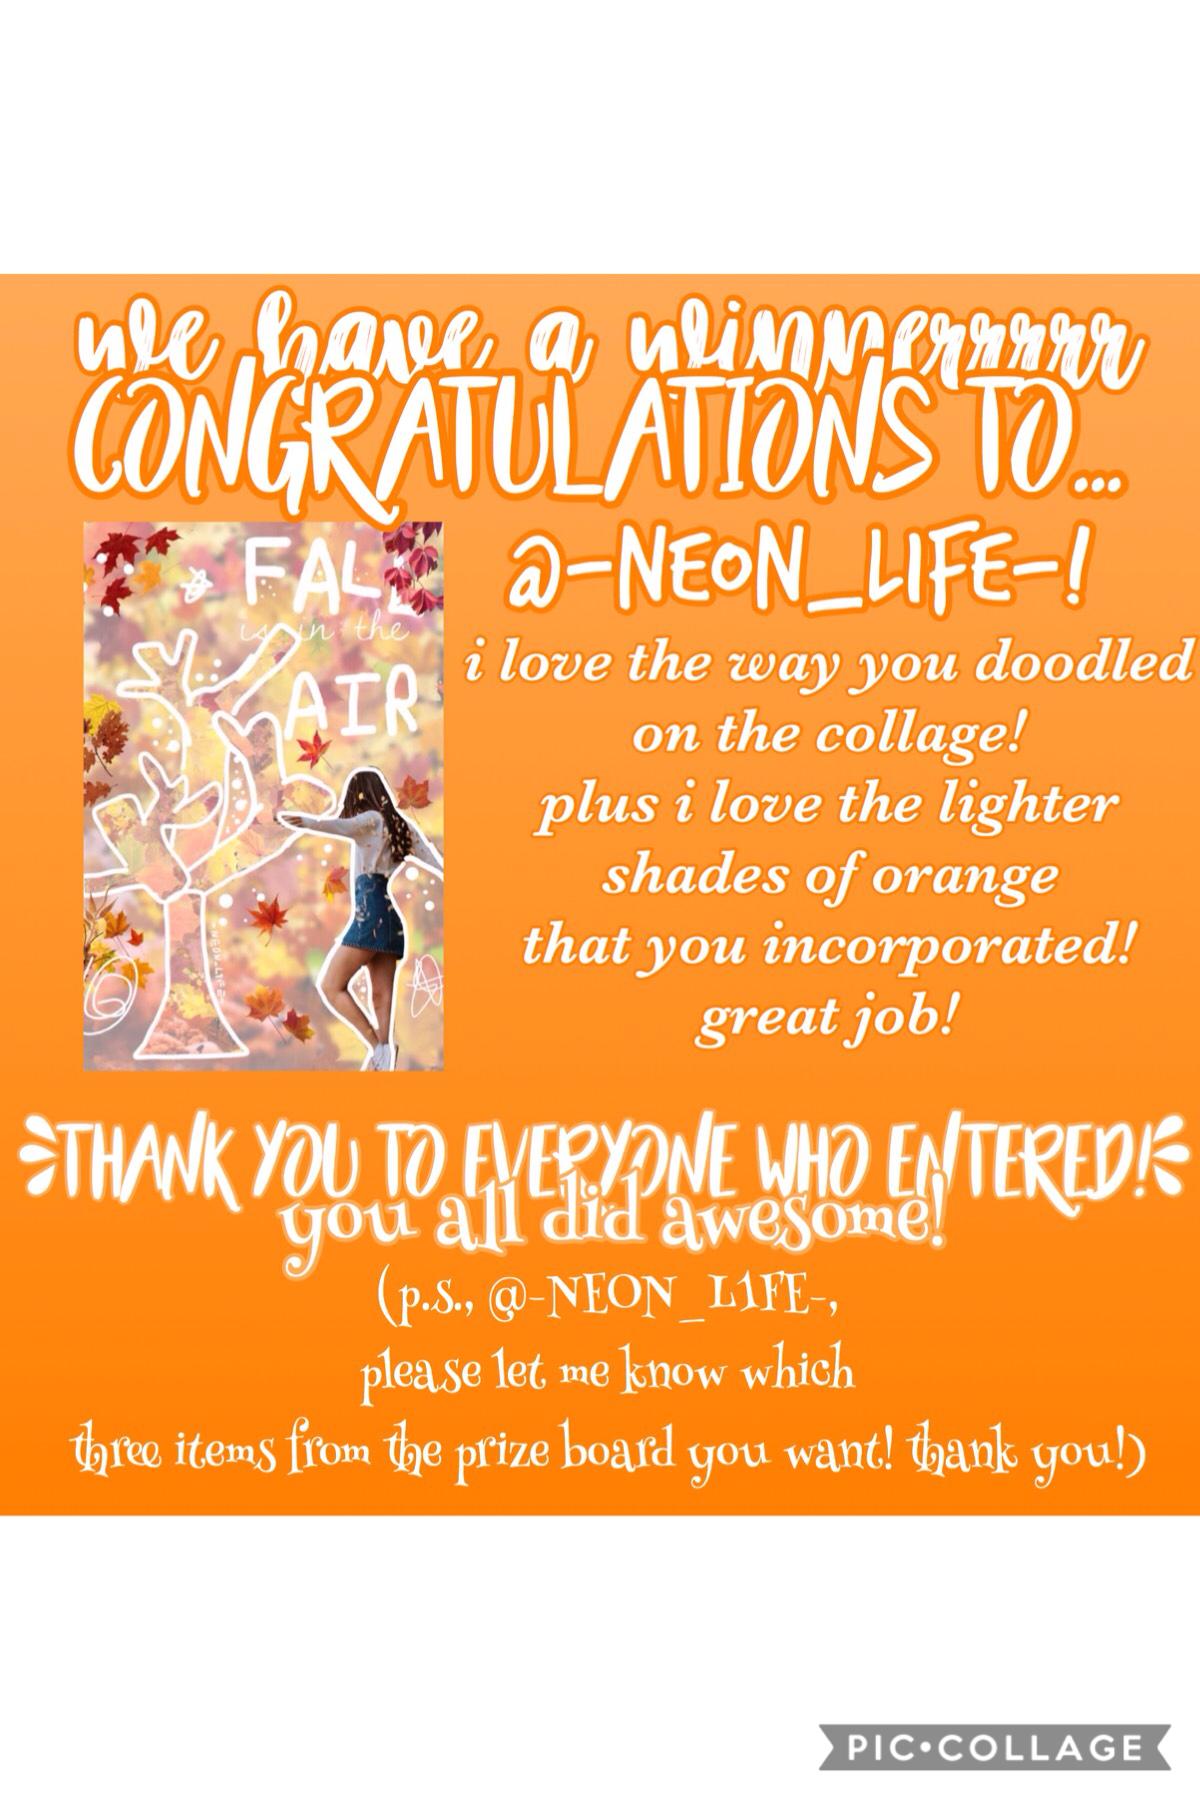 congratulations! 🎉🎊🎈
thank you all so much for entering!! happy fall! 😊🍁🍂🎃